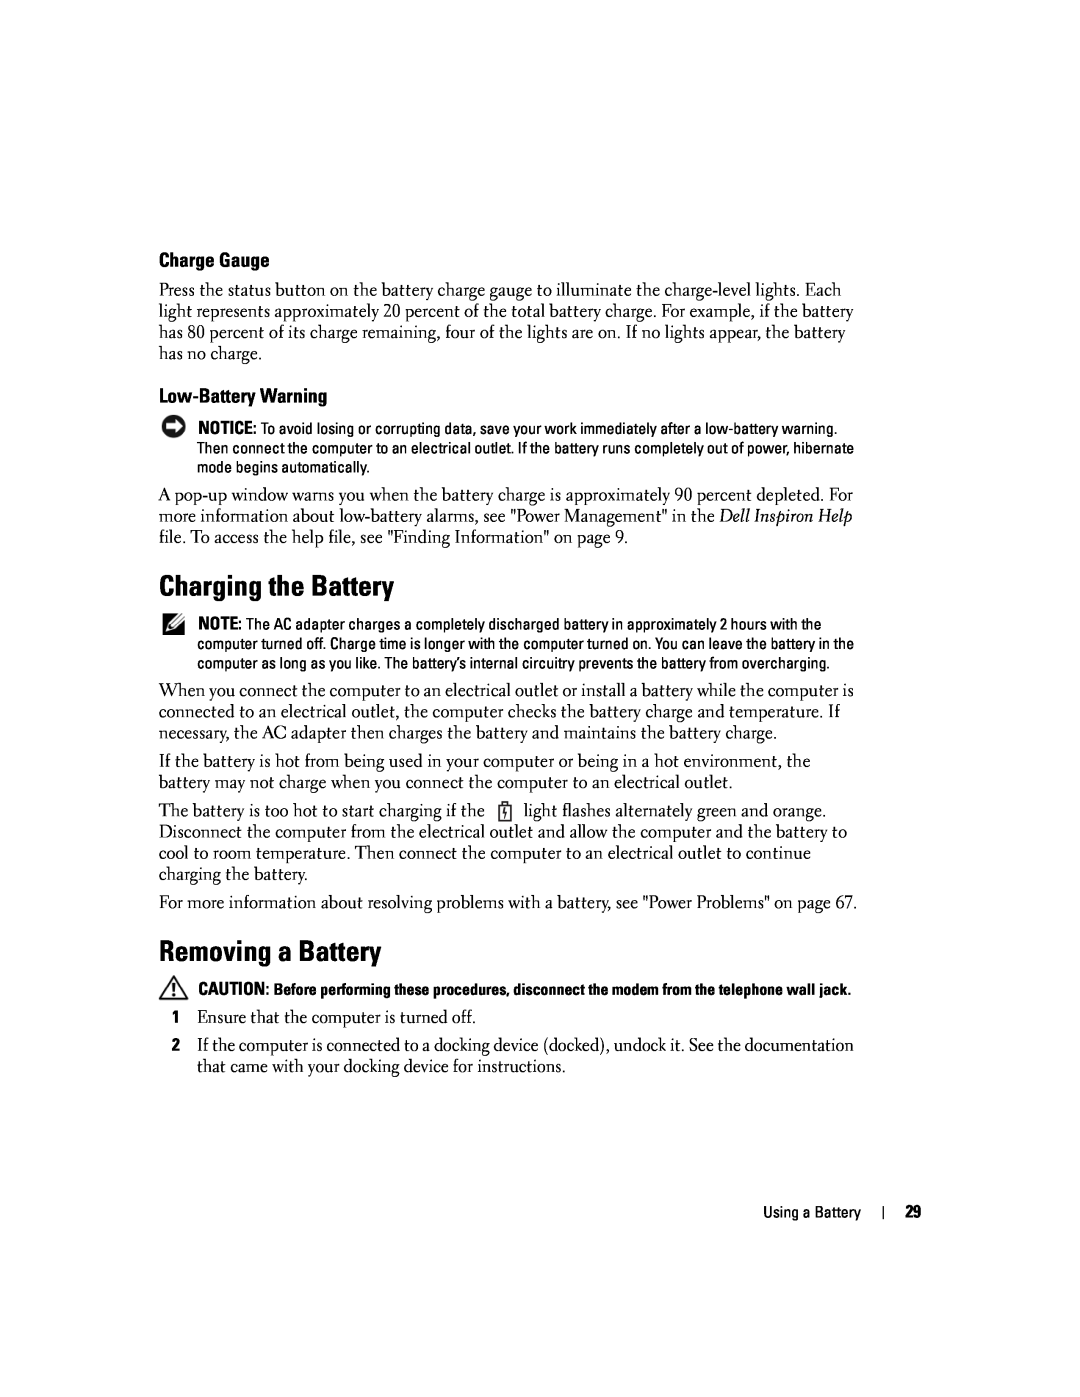 Dell 9300 owner manual Charging the Battery, Removing a Battery, Charge Gauge, Low-Battery Warning 